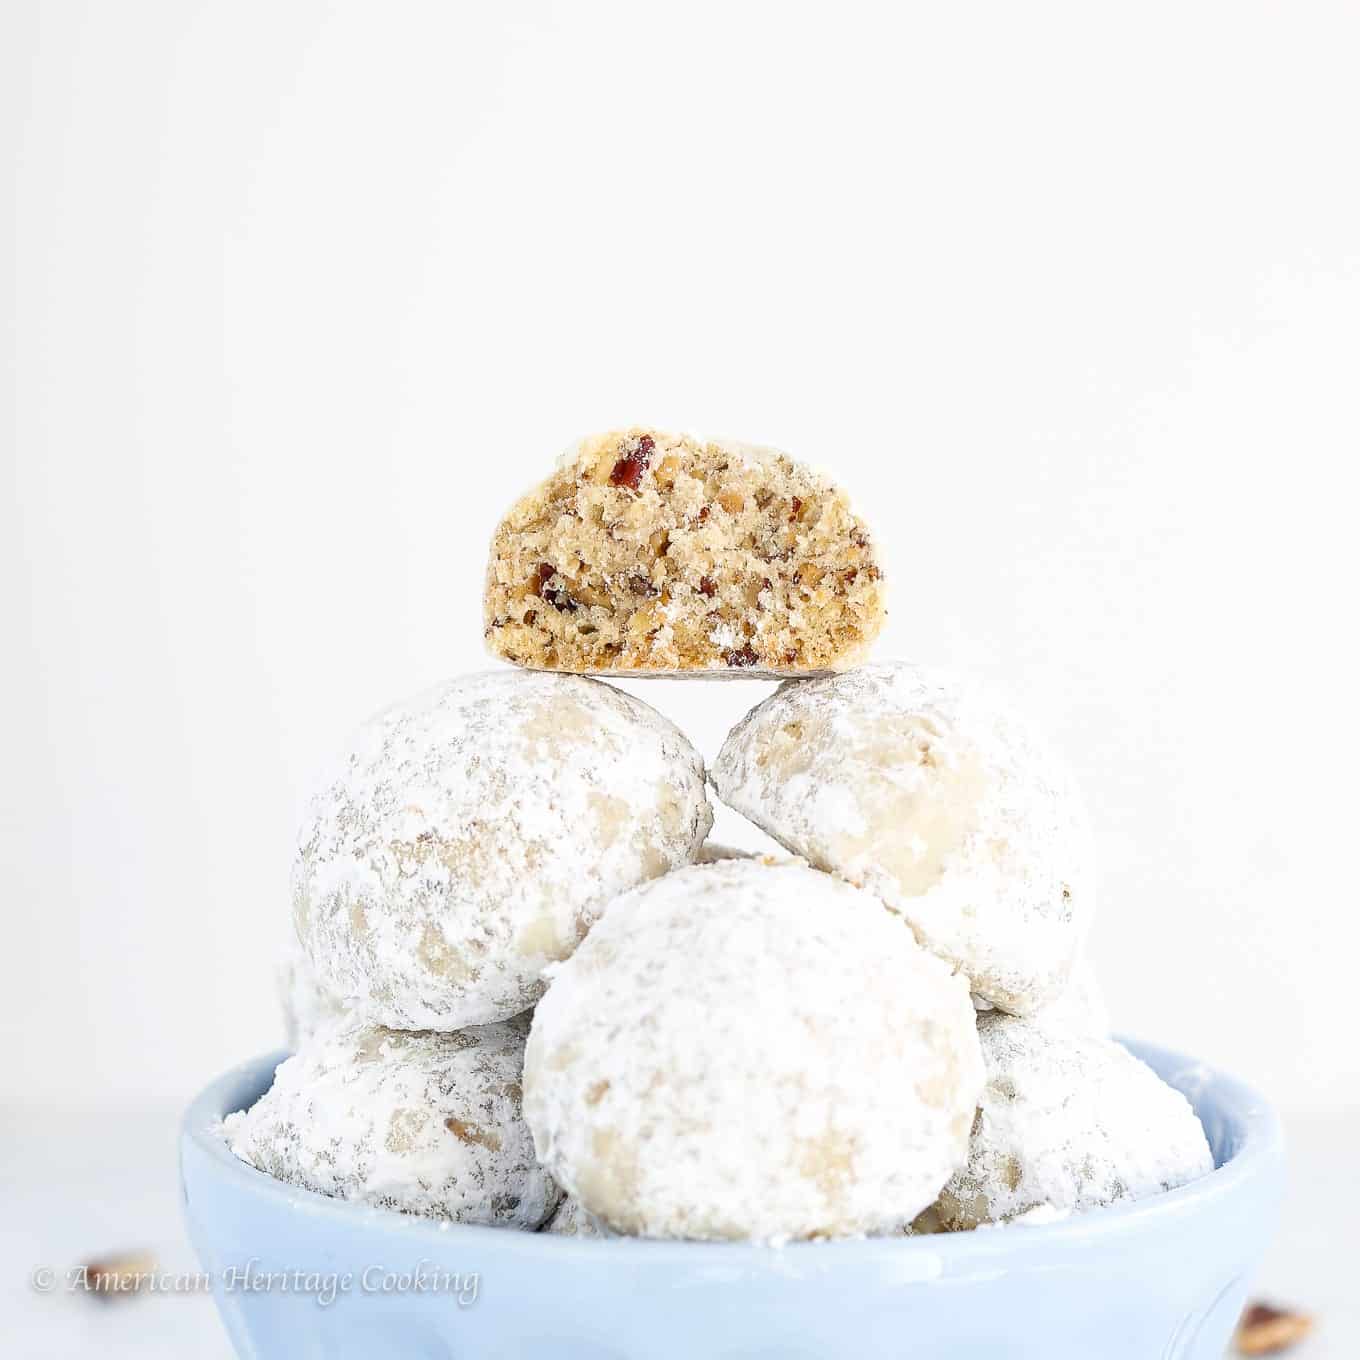 Mexican wedding cookies showing crumbly inside.